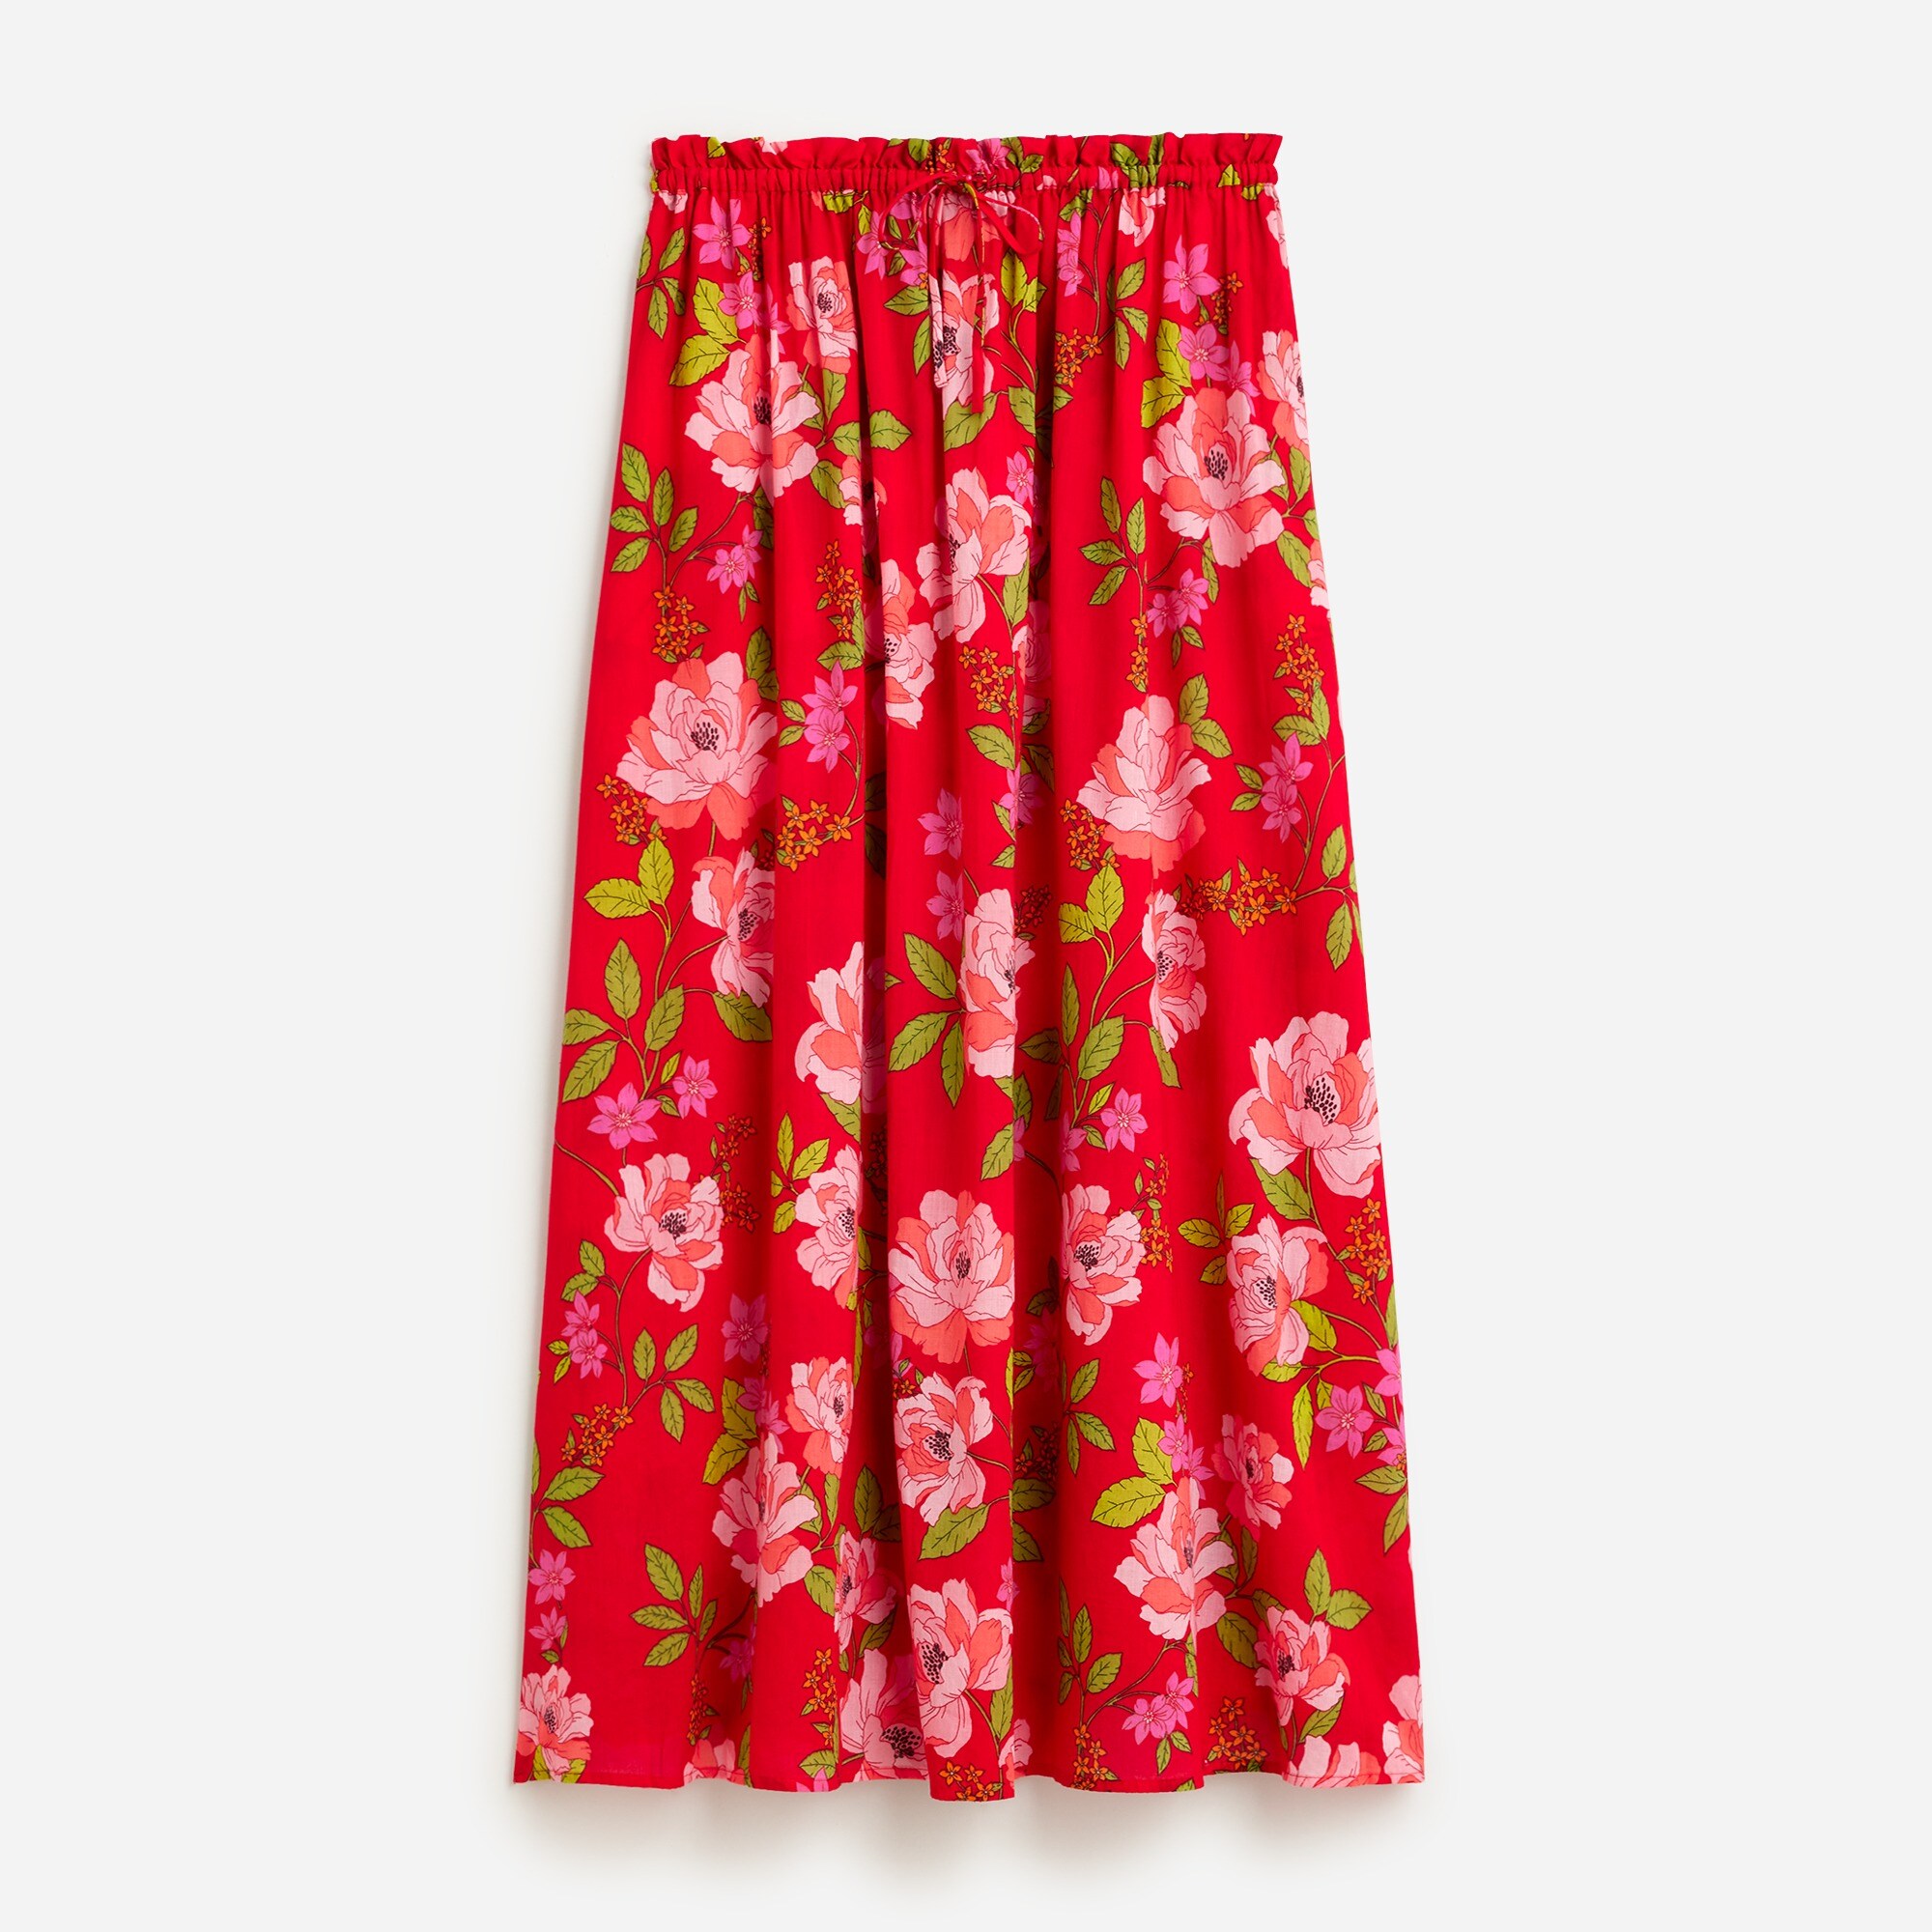  Cotton voile maxi skirt in peony vines